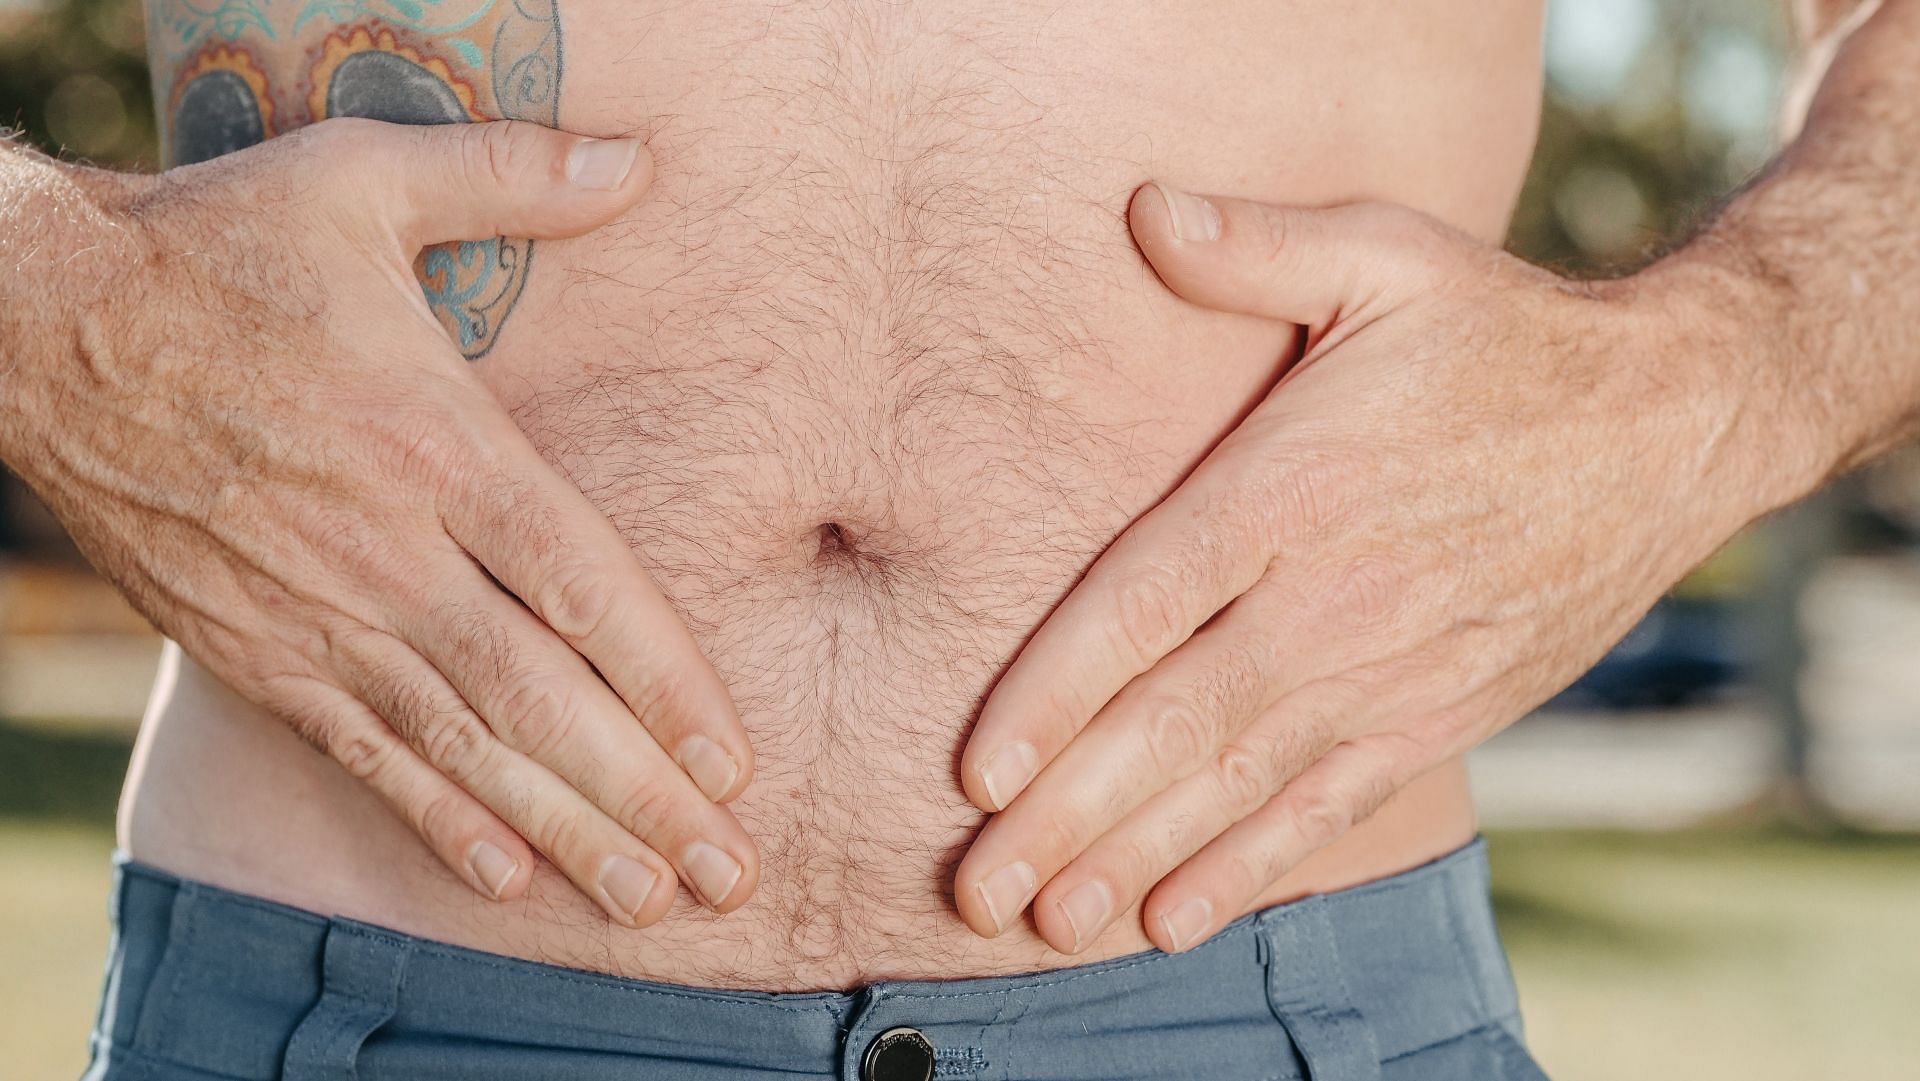 Ways to prevent bloating in holidays (image sourced via Pexels / Photo by kindel)